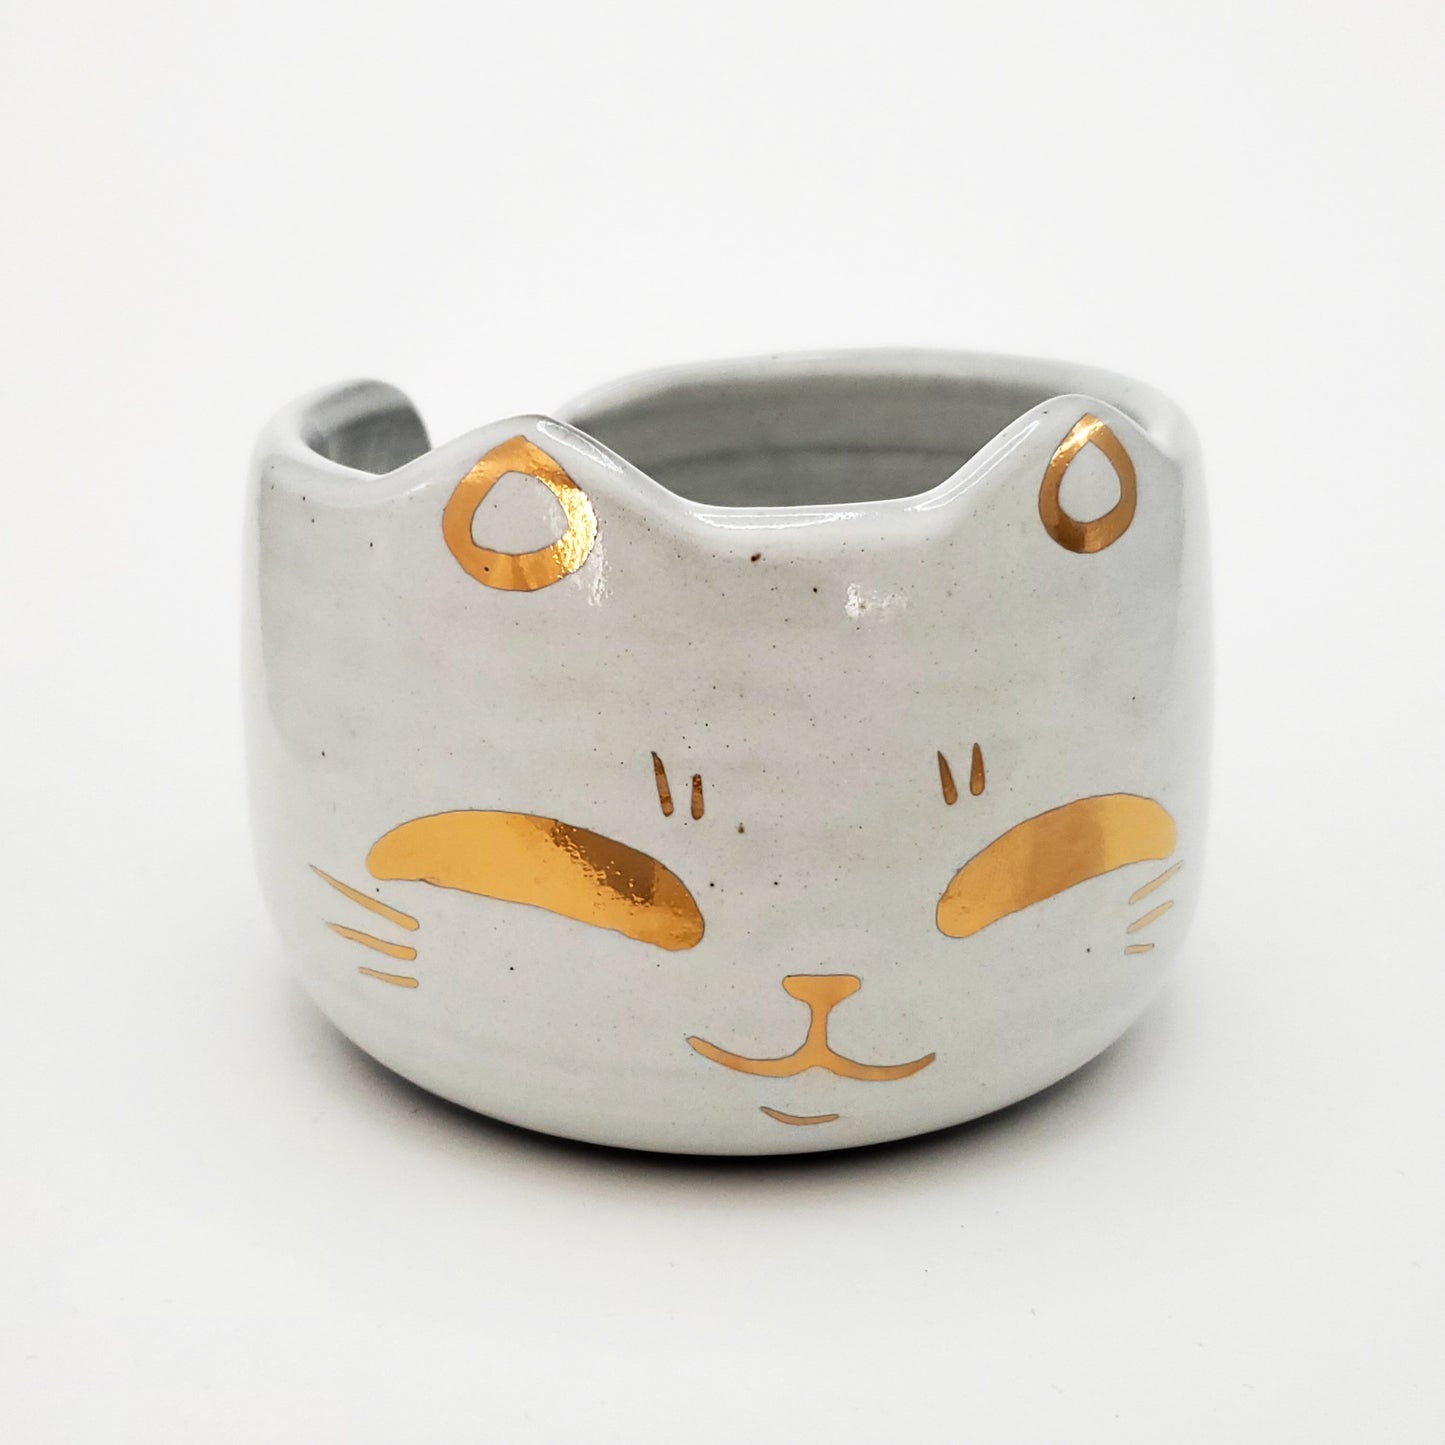 Smaller Cat Yarn Bowl with Gold